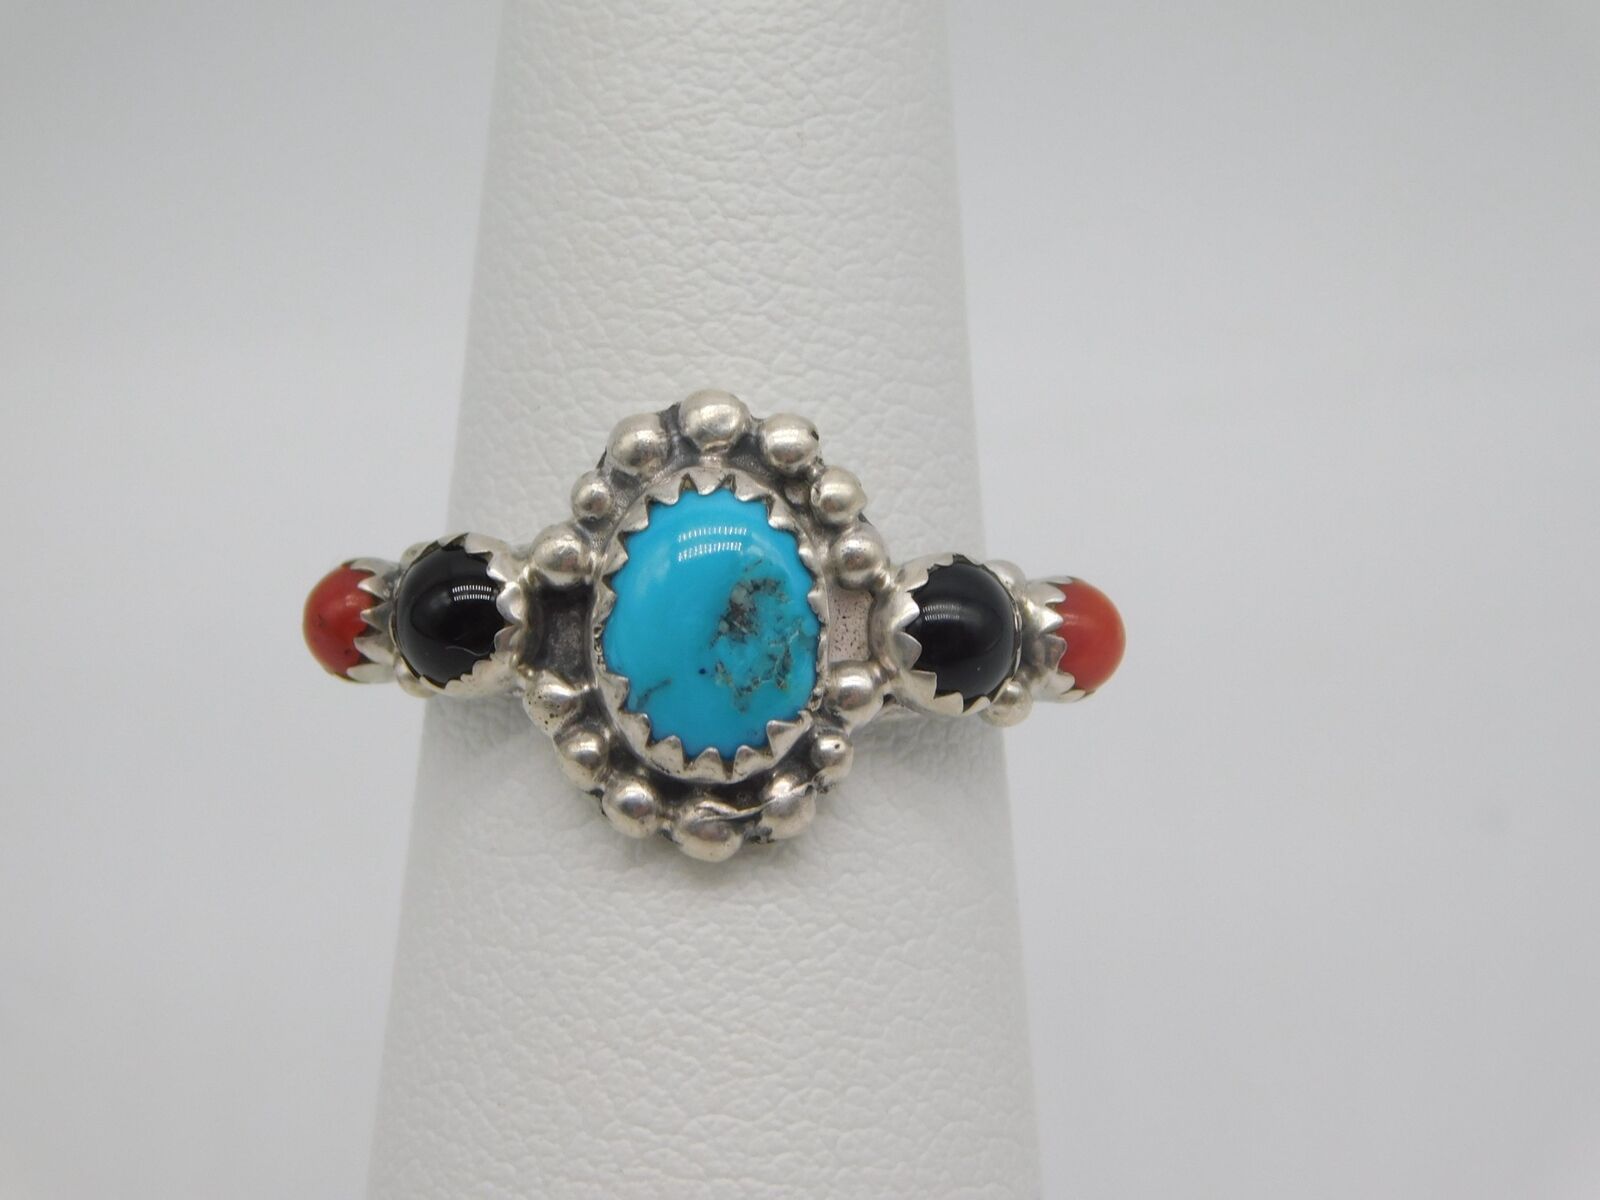 NATIVE AMERICAN NAVAJO INDIAN RICHARD BEGAY STERLING SILVER TURQUOISE STONE RING